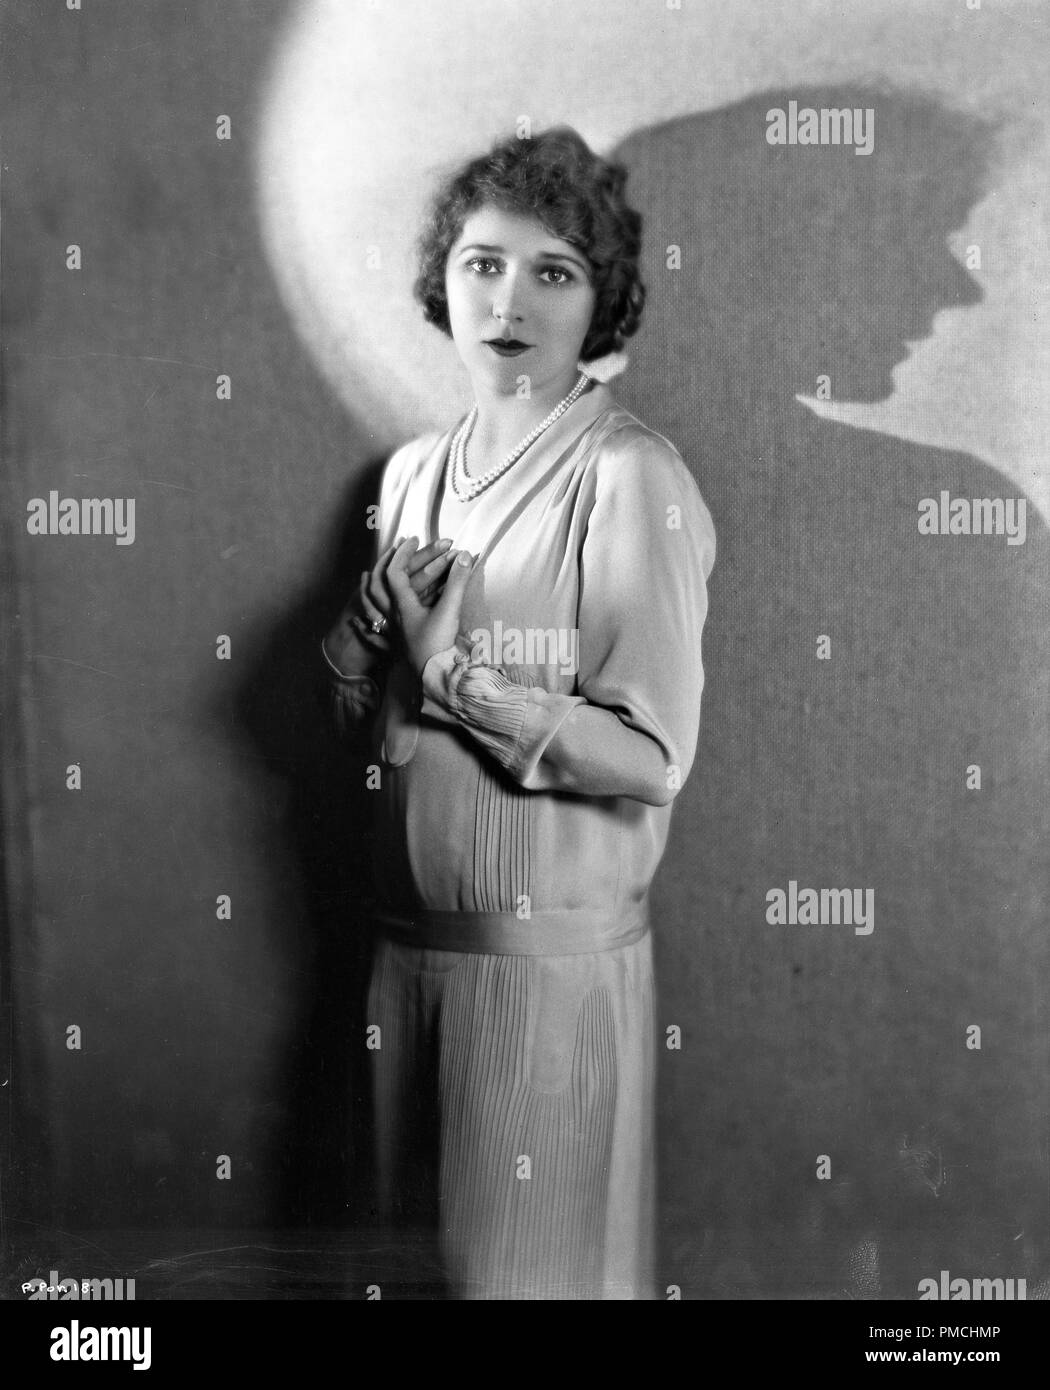 Mary Pickford 1925 Edwin Bower Hesser Portrait Dbl Wt Photo Iconic Actress  J9500